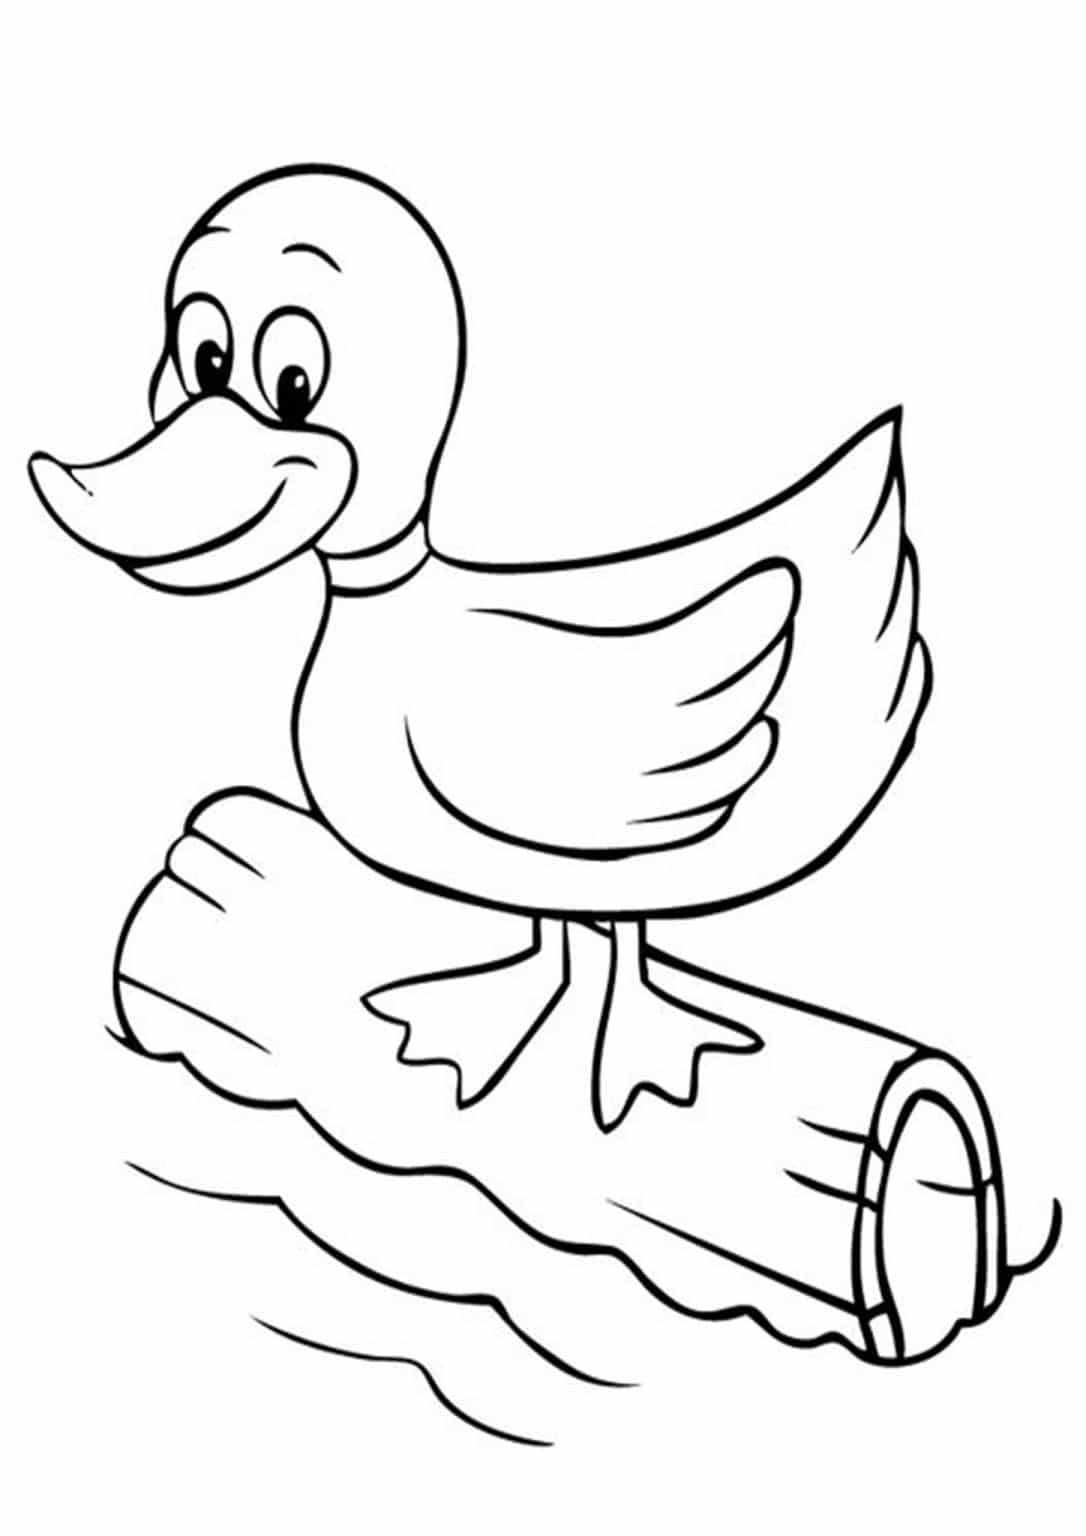 Free Easy To Print Farm Coloring Pages Animal Coloring Pages Animal Templates Colorin